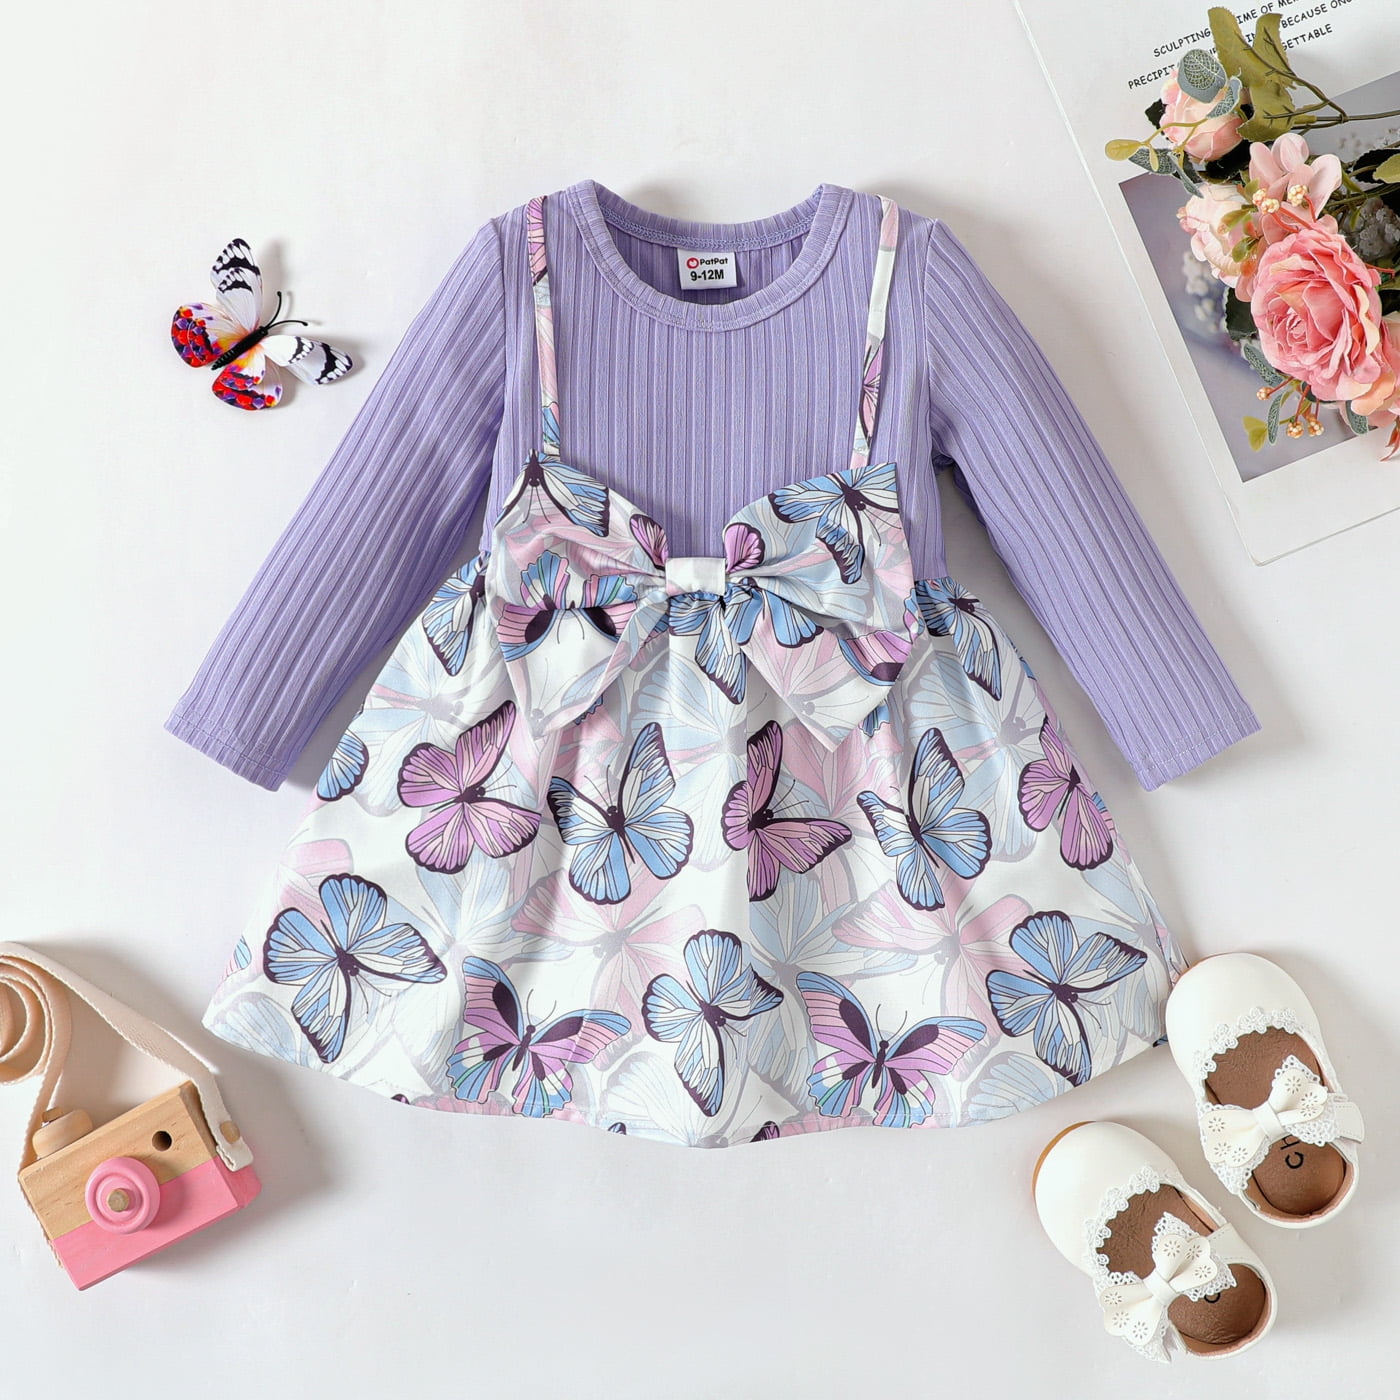 PatPat Baby Girls Strappy Dress,Infant Long Sleeve Splicing Bowknot ...